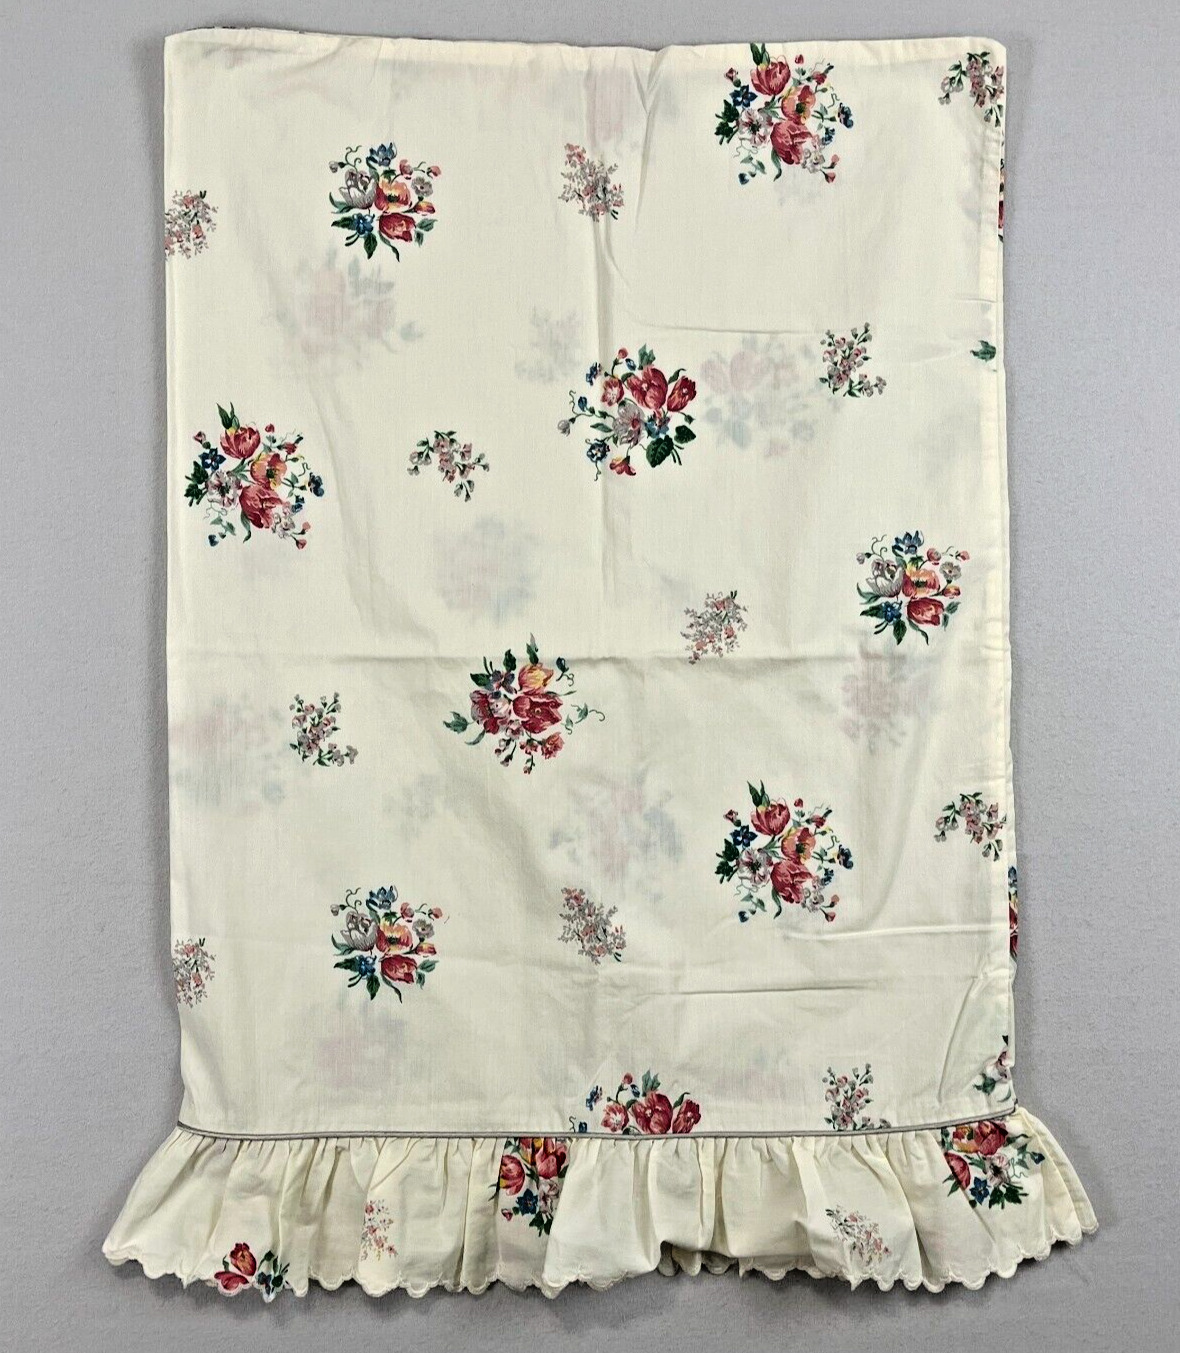 VINTAGE Floral Standard Pillow Case Ruffle Cottage Ivory Flowers Romantic Shabby